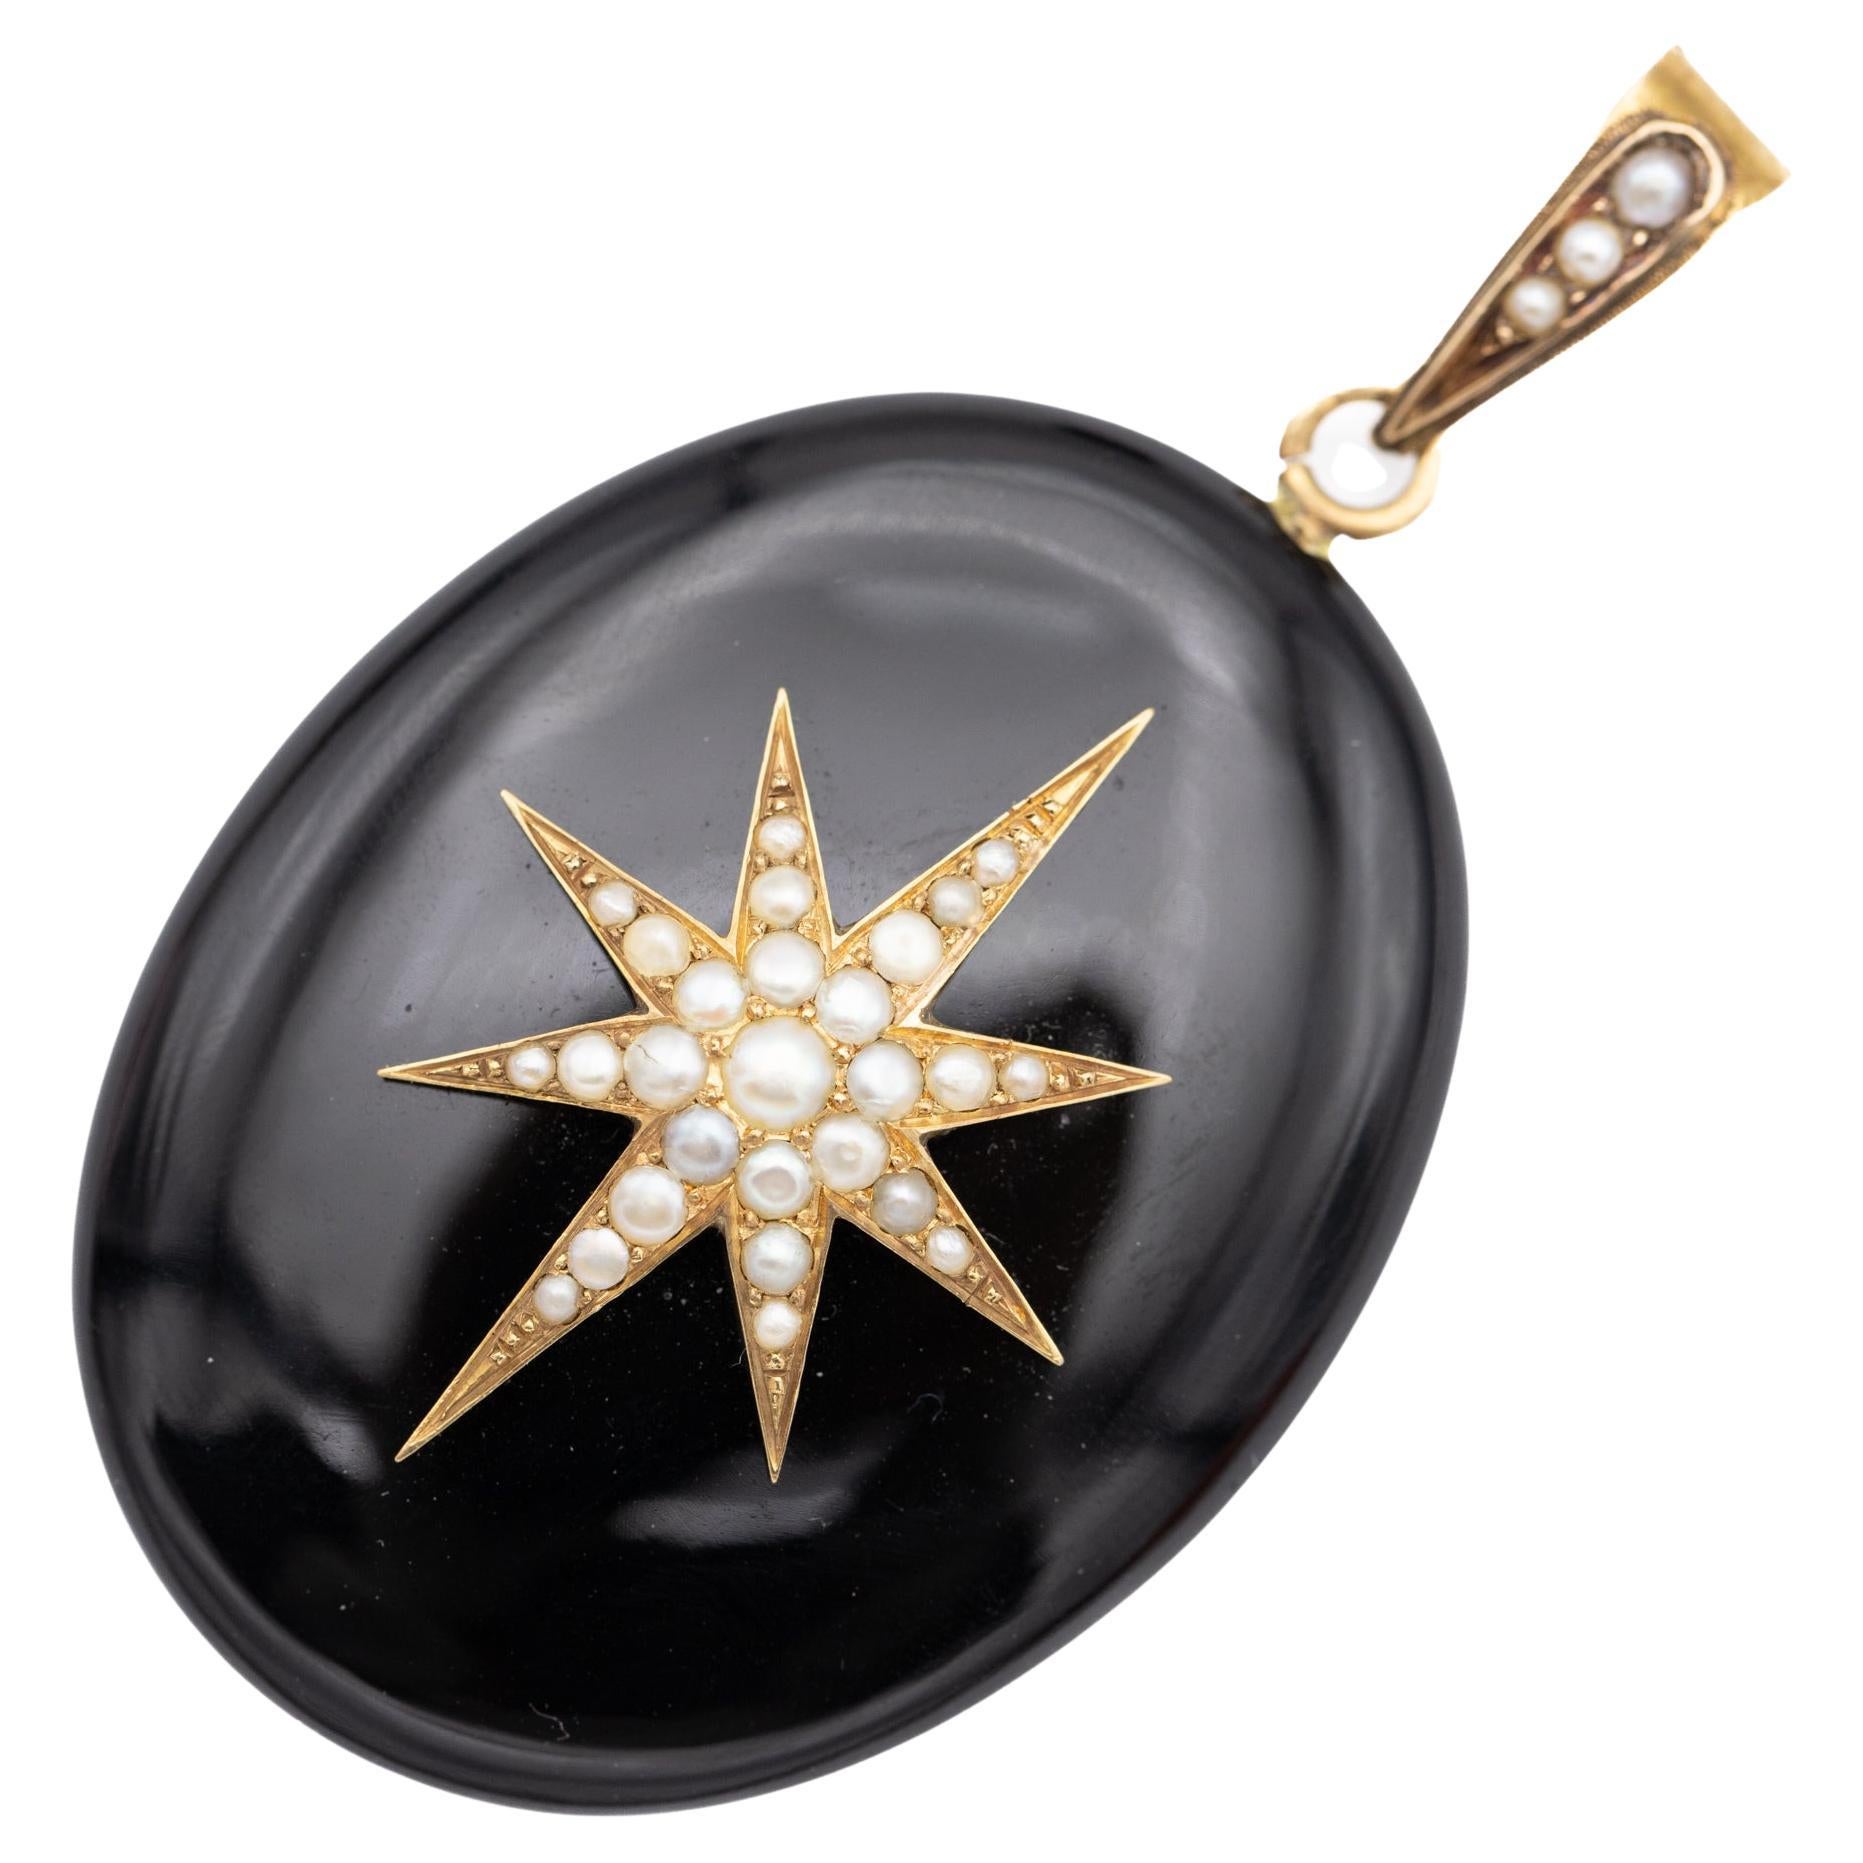 heavy 18K mourning pendant - solid gold Victorian Jet charm - Antique star 1870s